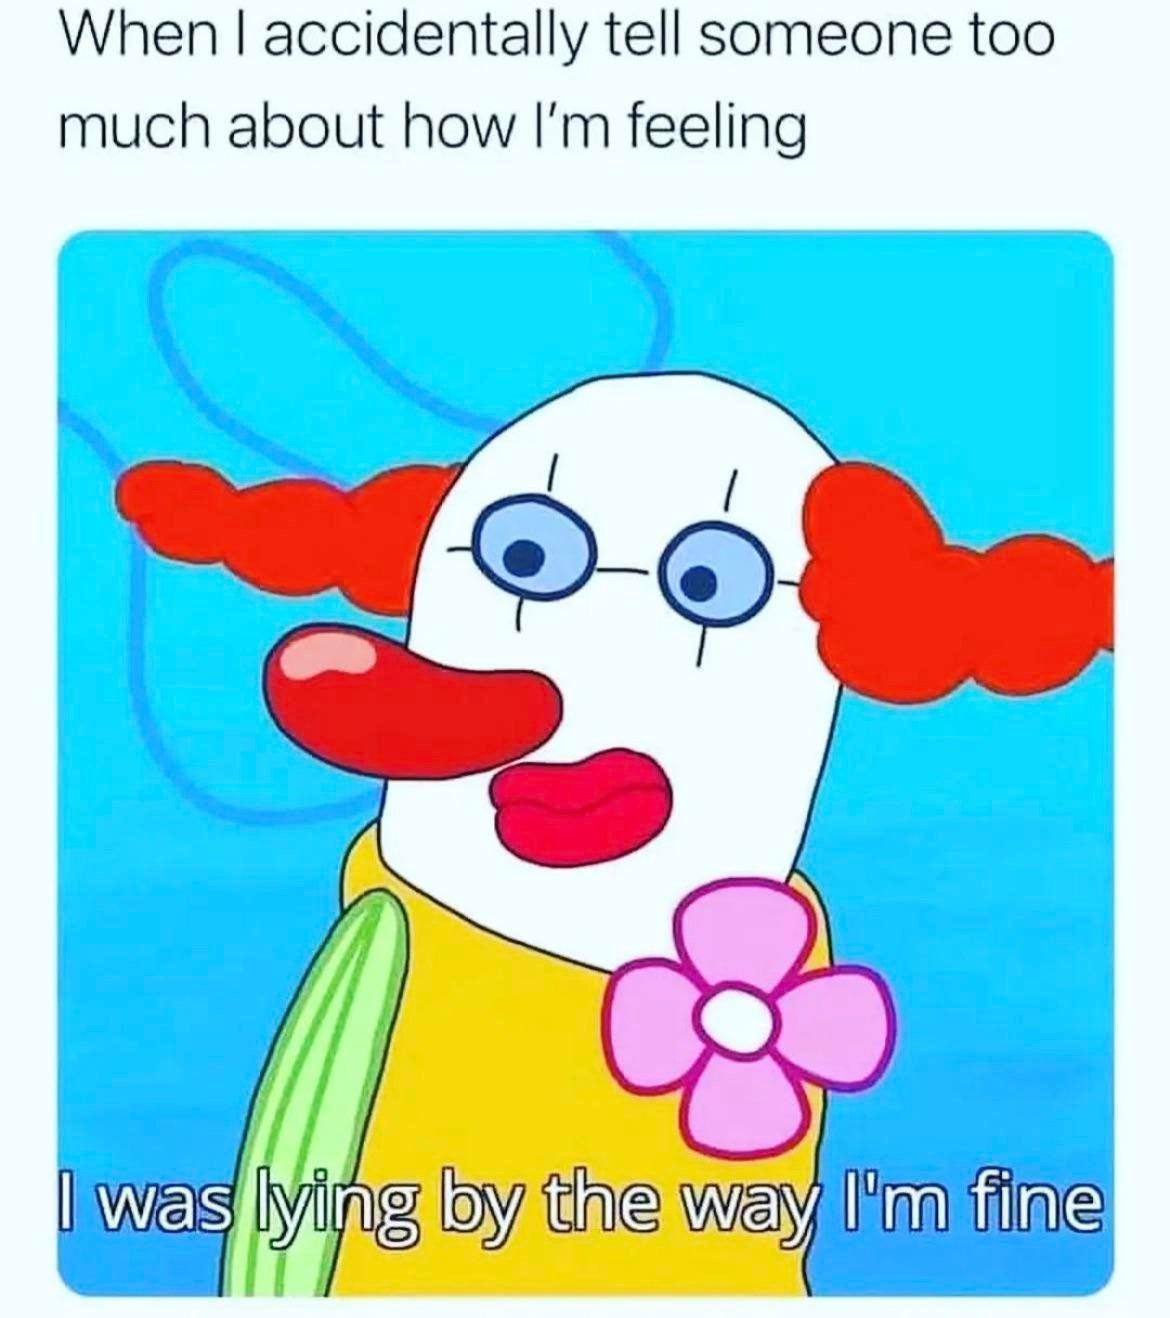 funny memes - dank memes - accidentally tell someone too much - When I accidentally tell someone too much about how I'm feeling I was lying by the way I'm fine